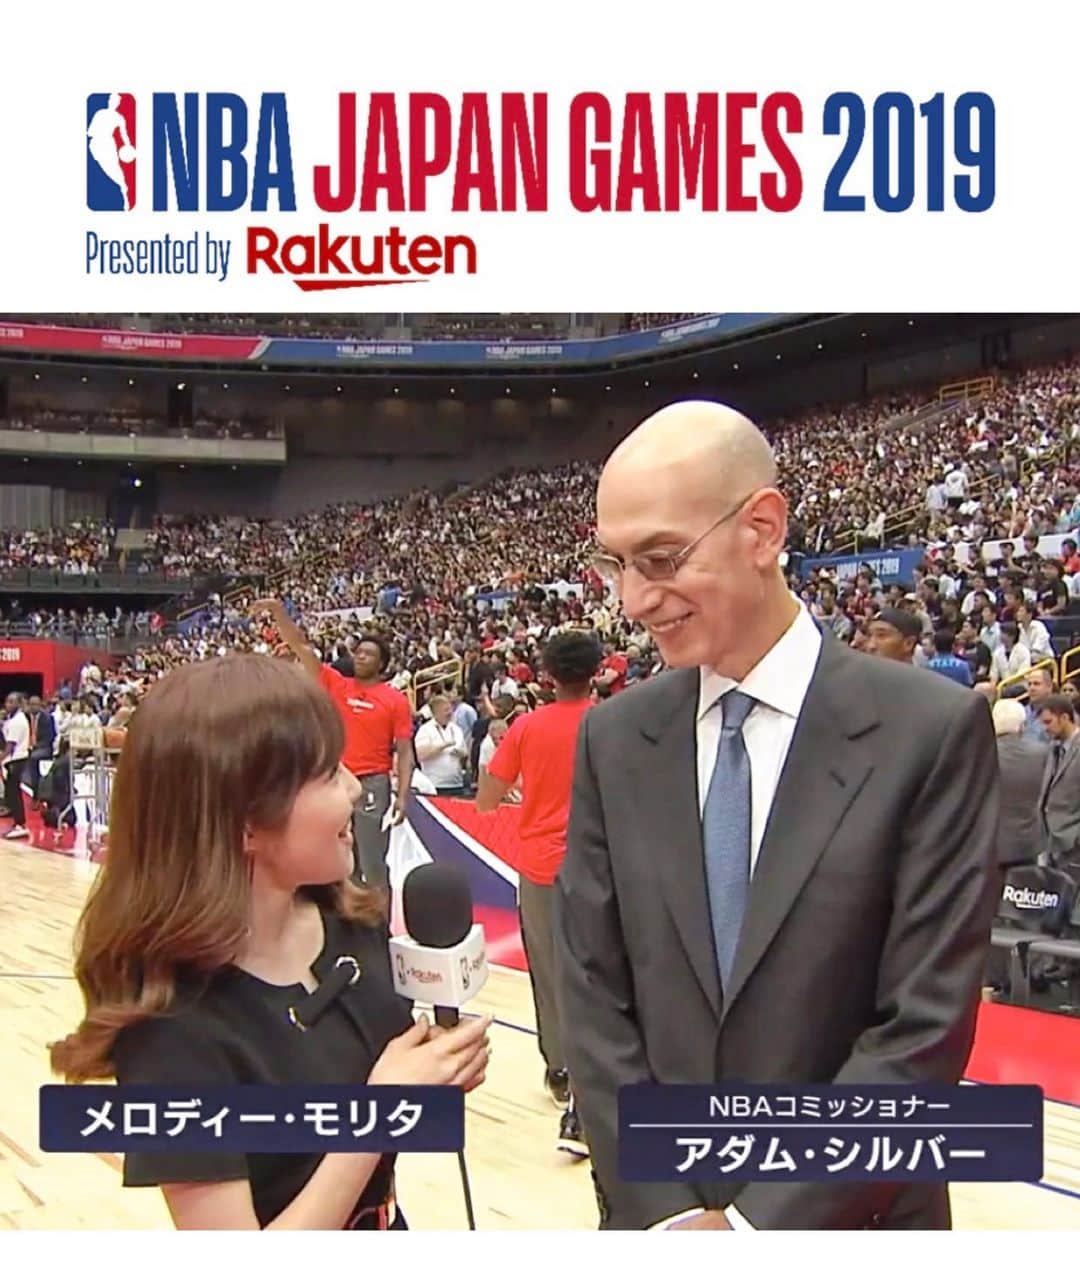 メロディー・モリタさんのインスタグラム写真 - (メロディー・モリタInstagram)「Interviewed @NBA Commissioner Adam Silver and players courtside at the Japan Games 2019!🏀✨ Swipe😊⬅️ Both games were extremely close which made all the fans get up on their feet and break out chants. The Japan Games concluded with a win from each team, giving the Japanese fans the best gift they were waiting for all these years.☺️ On the other hand, when I observed the players' bench during the game (as my media seat was right next to them), I saw many of them look up and across the arena and smile seeing how lively and ecstatic the crowd was. Thank you NBA, the players, and everyone who worked endless hours to make many peoples' dream become a reality.🙏✨ * During the interviews, the players shared "Japan is one of the most beautiful countries in the world with such kindhearted people. I'll definitely be back in Tokyo next year for the Olympics." When I had the greatest honor of interviewing the Commissioner, he mentioned, "Sixteen years has flown by since the last Japan Games, and we should not let that happen again." Therefore, I truly hope and look forward to another Japan Games in the very near future. Now it's time for us to get ready for the 2019-2020 NBA season, beginning on 10/22!😄🙌🔥 * 16年ぶりに行われたジャパンゲームズは、NBAの新しい時代を感じ大盛り上がりの中、ラプターズ１勝、ロケッツ１勝という結果で幕を閉じました！👏 * コートサイドNBA選手インタビューでは、「日本は美しい国で、人も思いやりがある。オリンピックで必ず東京に帰ってくる」と宣言してくれた選手も✨ * アダム・シルバー コミッショナーにインタビューをさせて頂いた際、「ジャパンゲームが16年も空いたなんて、あってはならないこと」と語っておられましたので、また近い将来、日本でNBAジャパンゲームが開催されることを期待しつつ、現地10月22日から始まるレギュラーシーズンで更に更に盛り上がりましょう‼️😄 日本からの温かい応援を引き続きどうぞ宜しくお願いします。 #NBA #JapanGames #NBAJapanGames #NBARakuten #Raptors #Rockets #MelodeeinJapan #melodeemoritainterviews」10月12日 14時03分 - melodeemorita